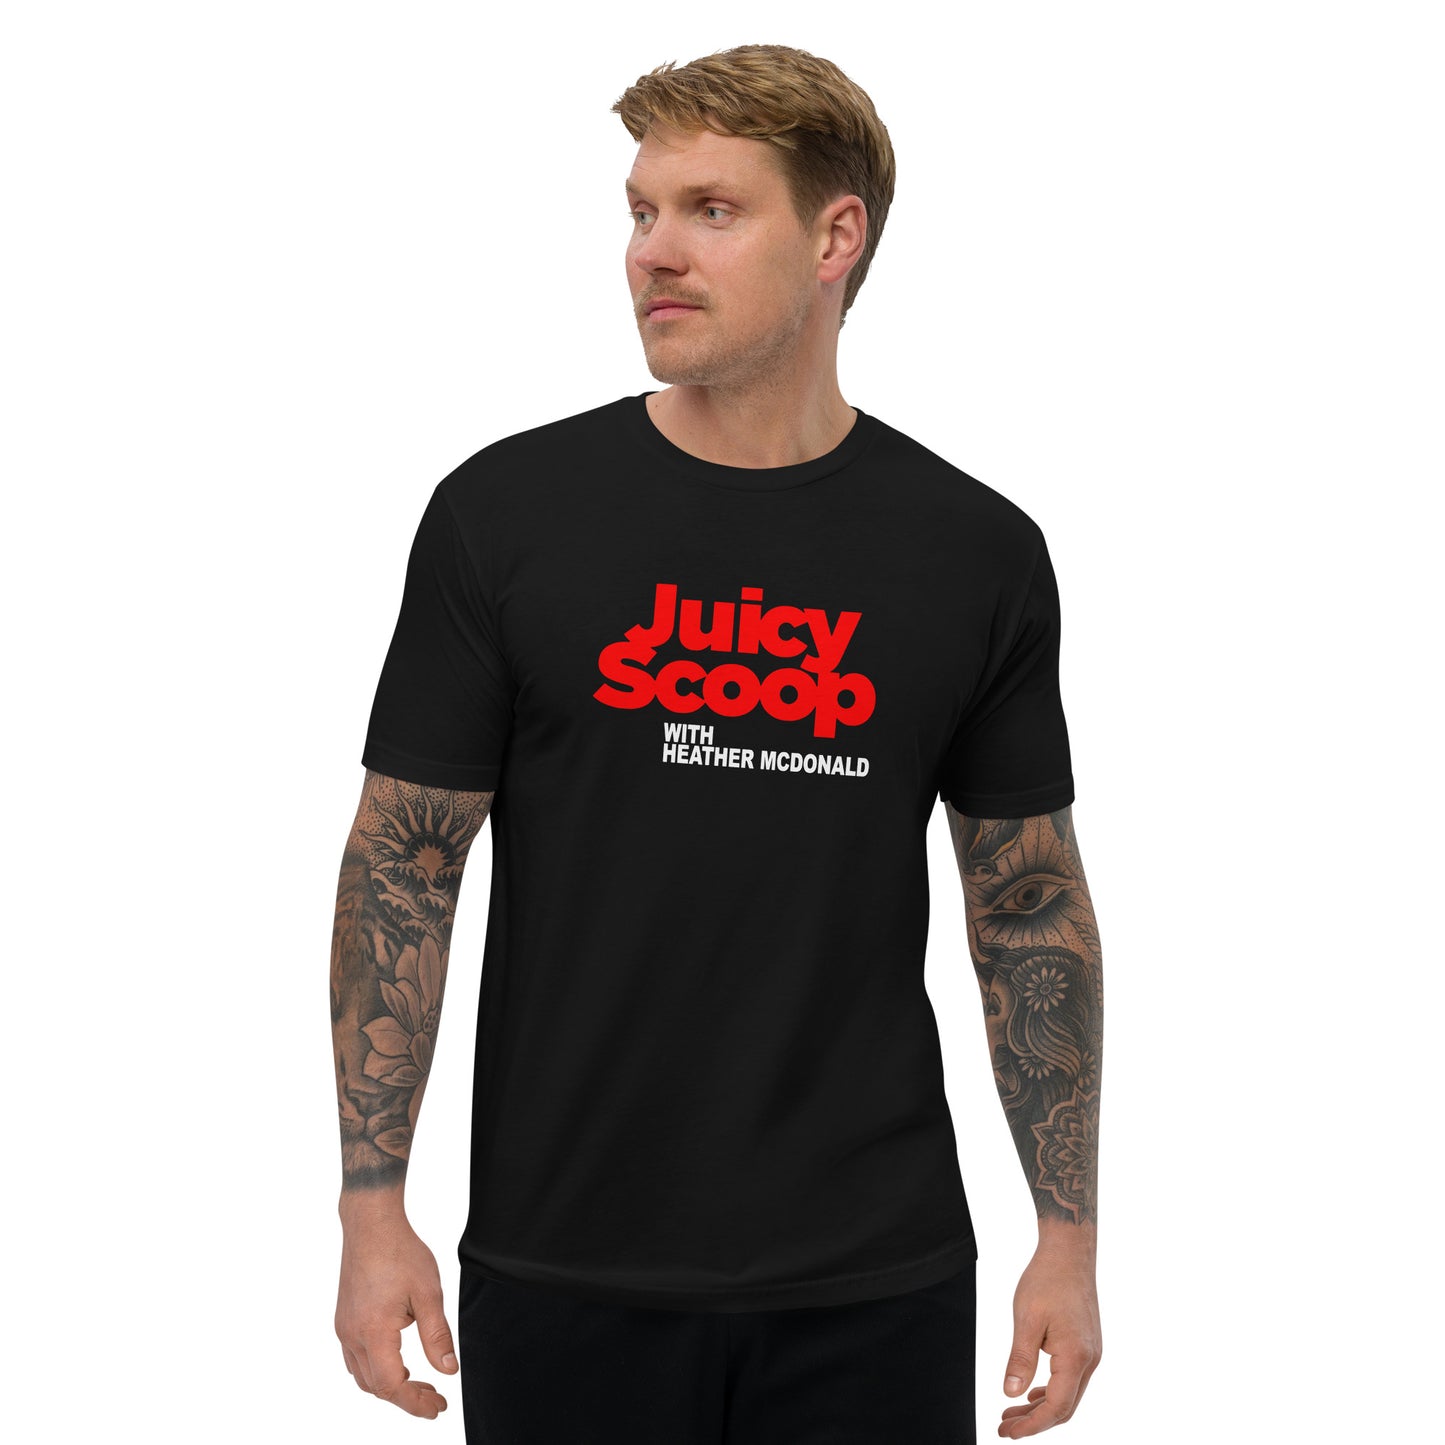 Juicy Scoop with Heather McDonald Fitted Men's Short Sleeve T-shirt